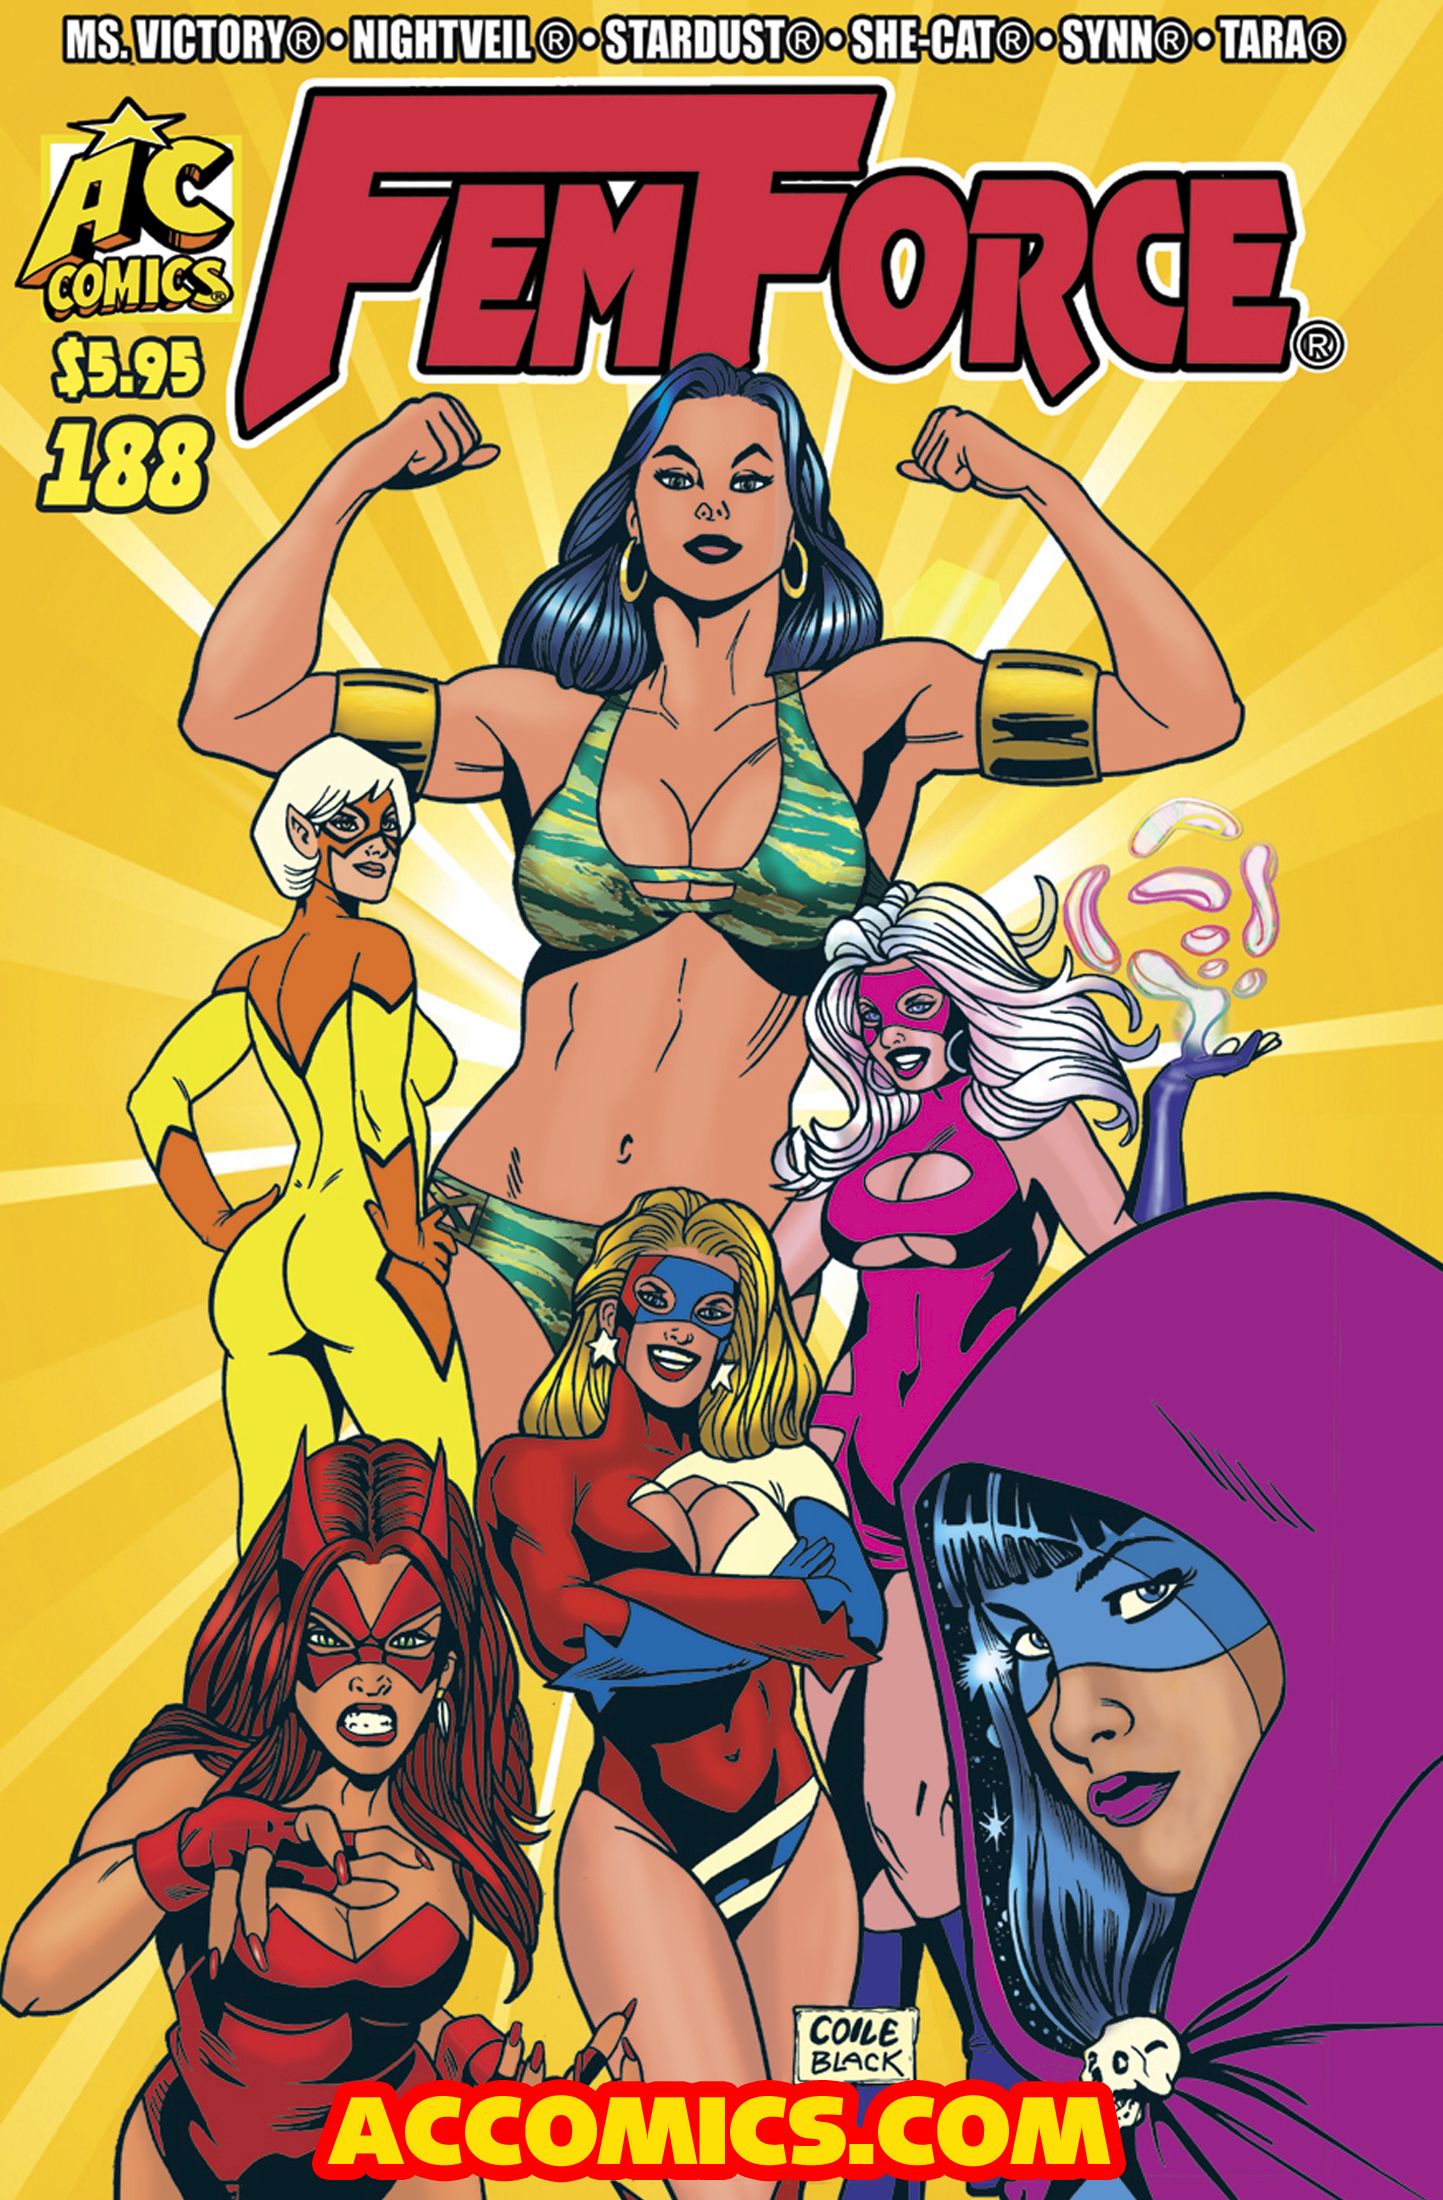 A new era begins at AC COMICS in December 2019 as the long-running FEMFORCE title (published in black and white since 1995) to with issue #188!! – FIRST COMICS NEWS